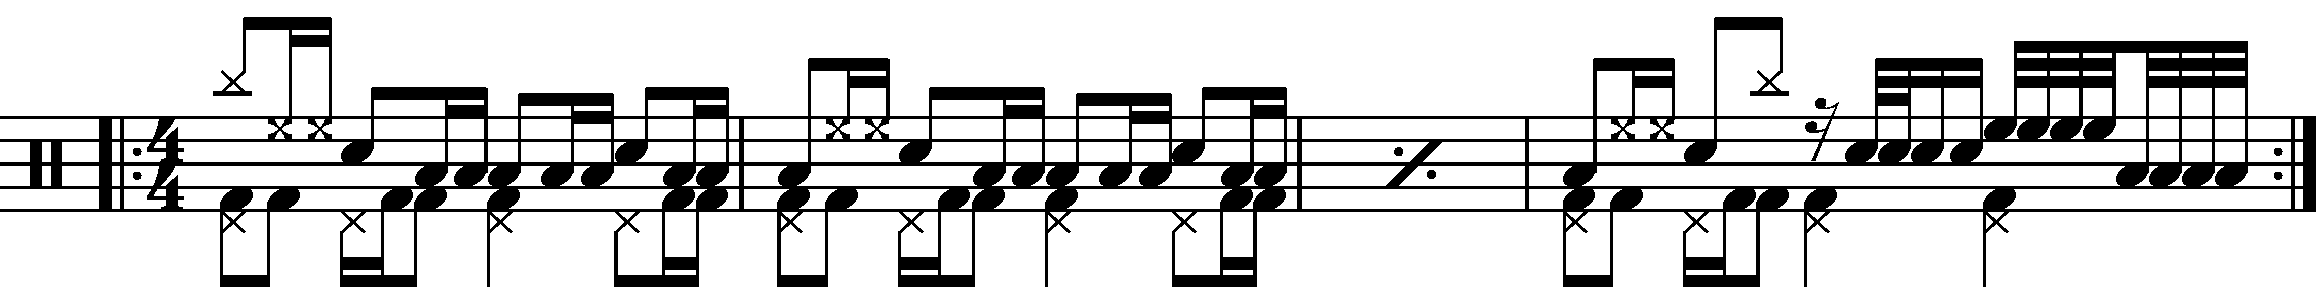 A four bar phrase based on the galloping floor tom groove concept